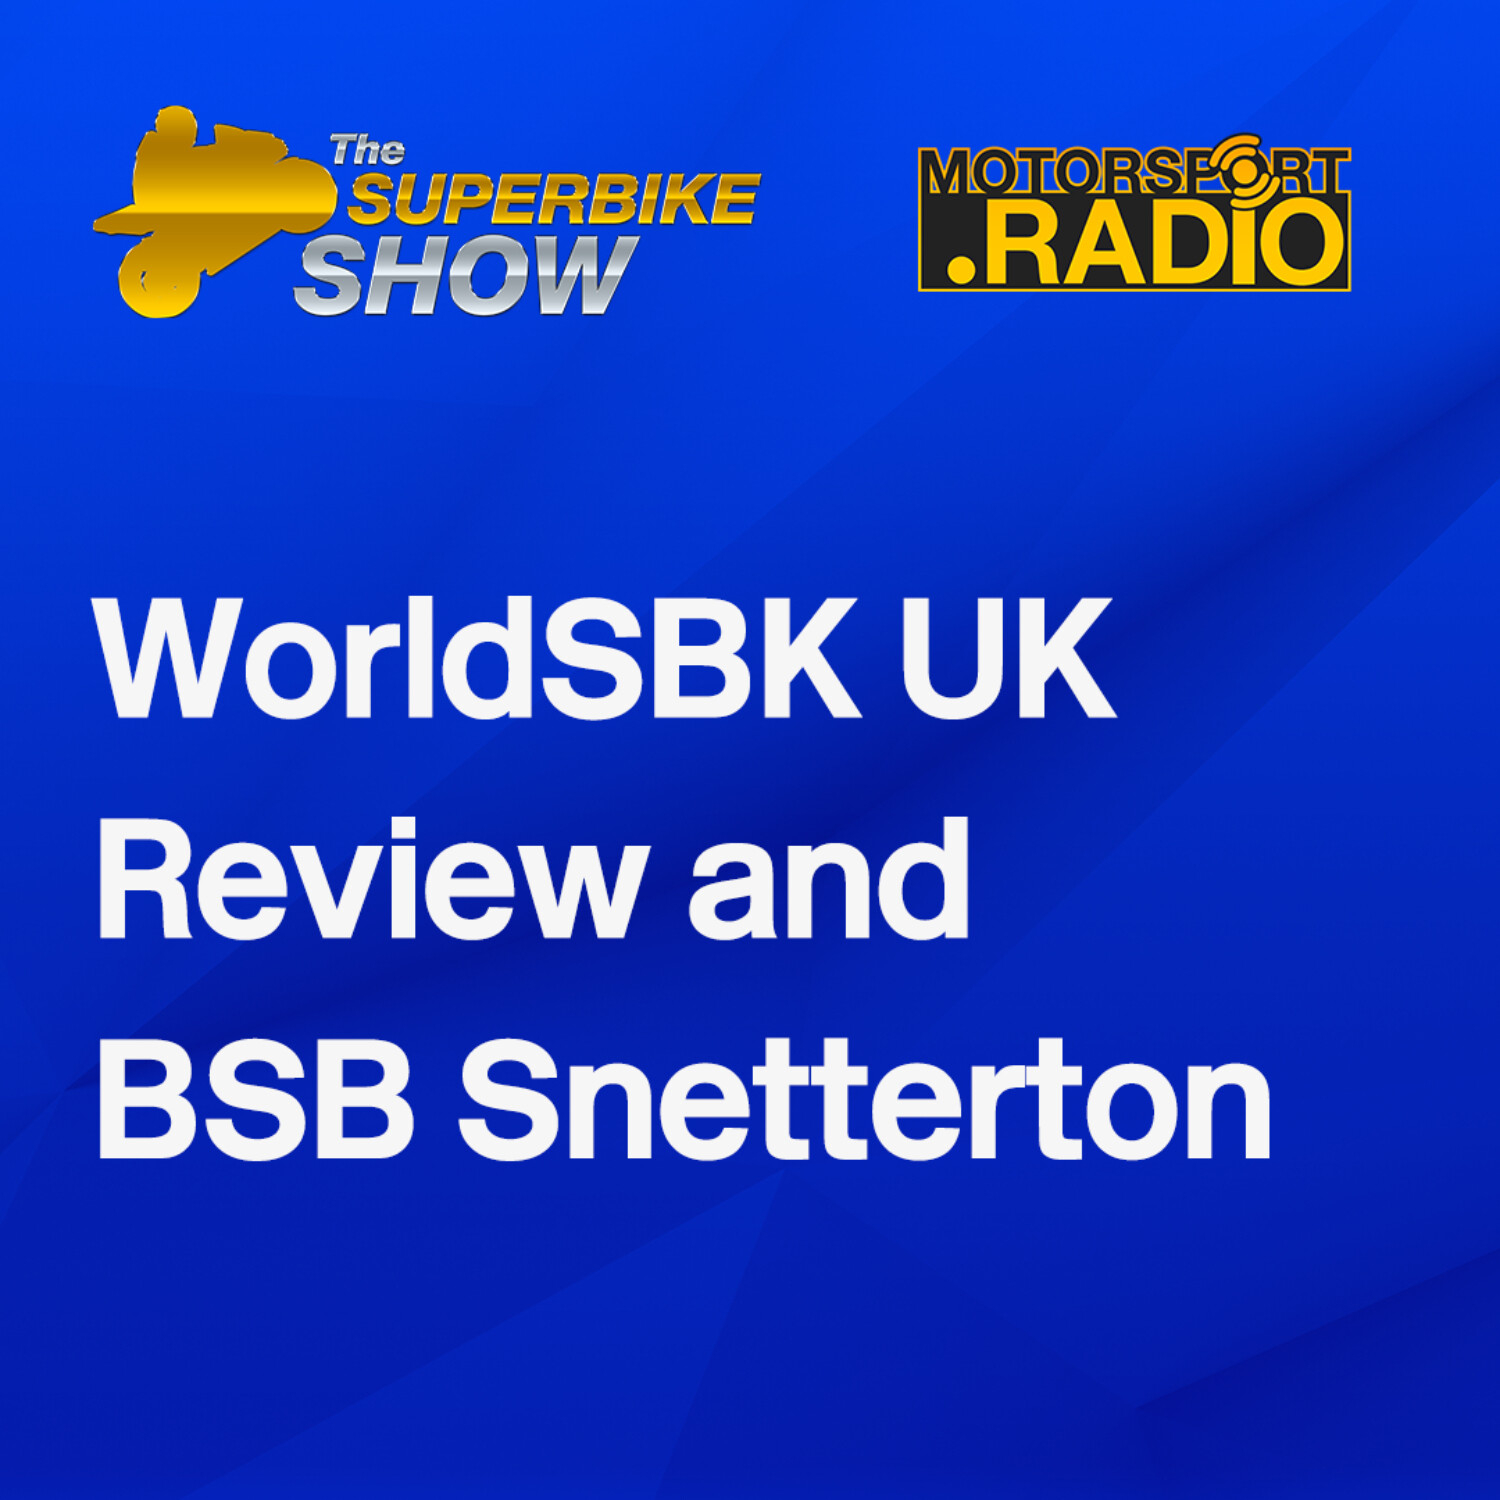 The Superbike Show - #WorldSBKUK Review and #BSB Snetterton Preview